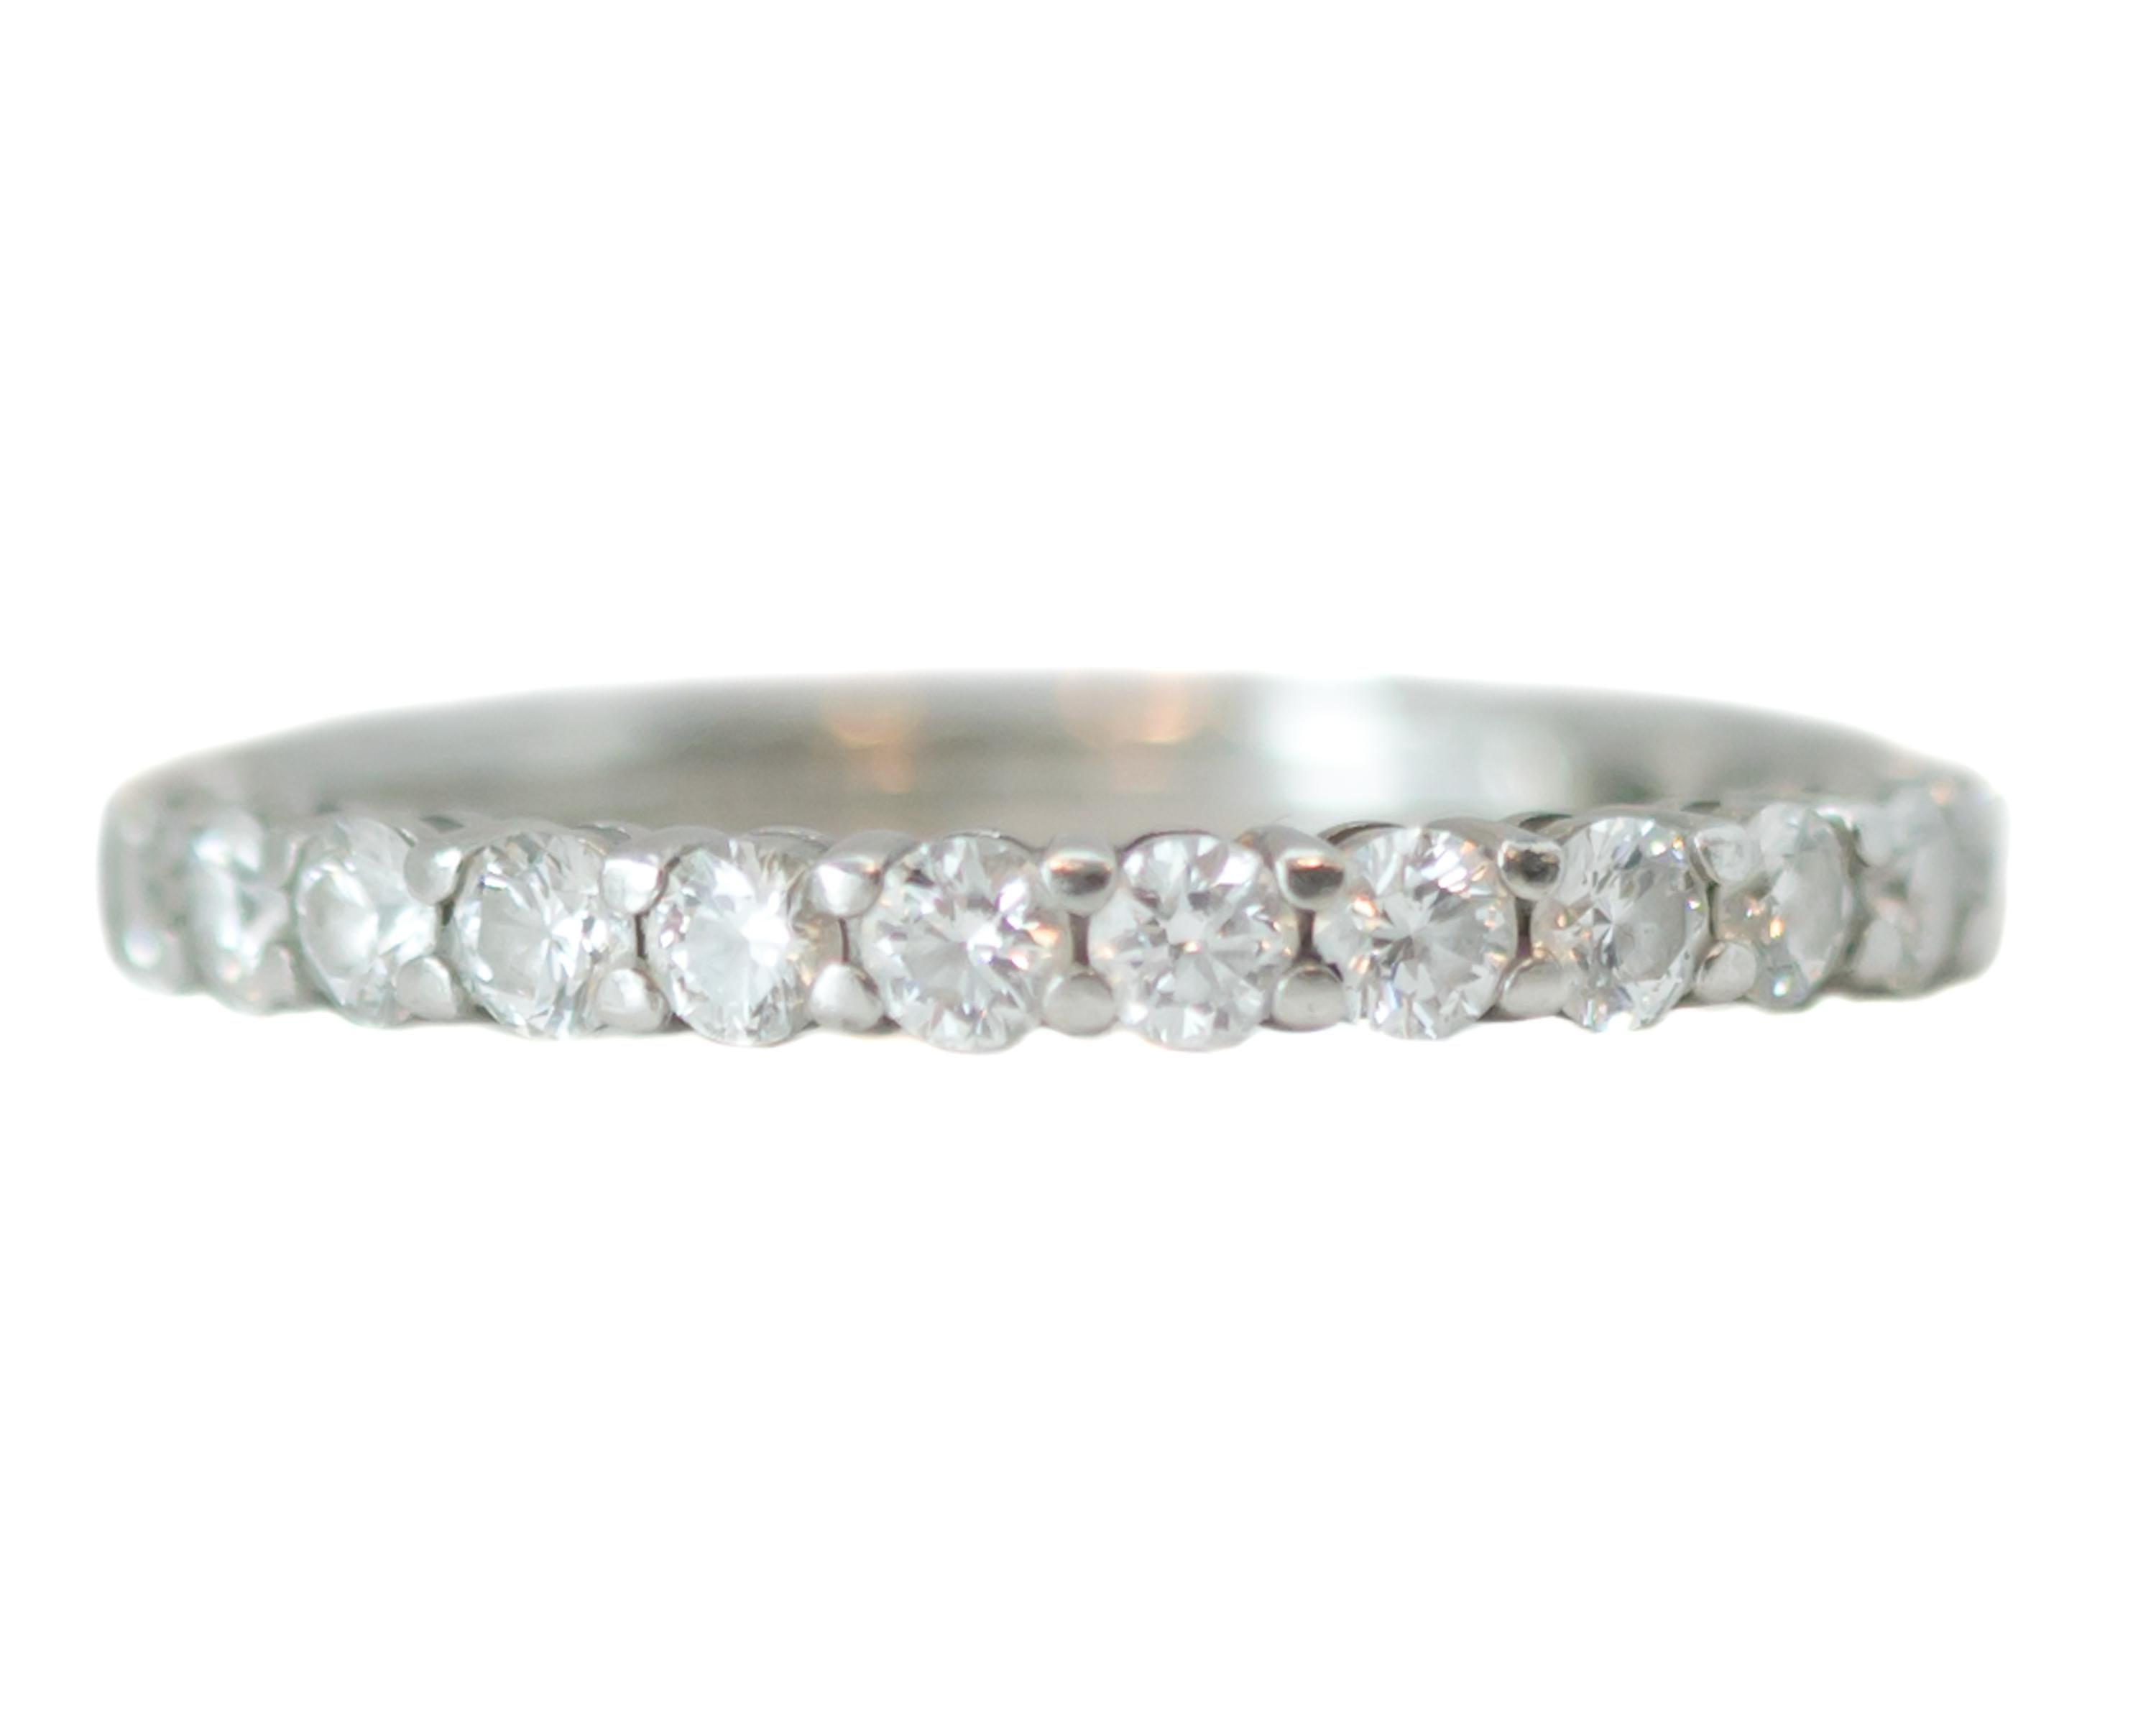 Tiffany and Co. Embrace Band Ring - Platinum, Diamonds

Features:
2.2 millimeter Band
0.78 carat total weight Round Brilliant Diamonds
Full circle of diamonds
Platinum setting
Ring fits a size 4 

Ring Details:
Size: 4
Width: 2.2 millimeters
Metal: